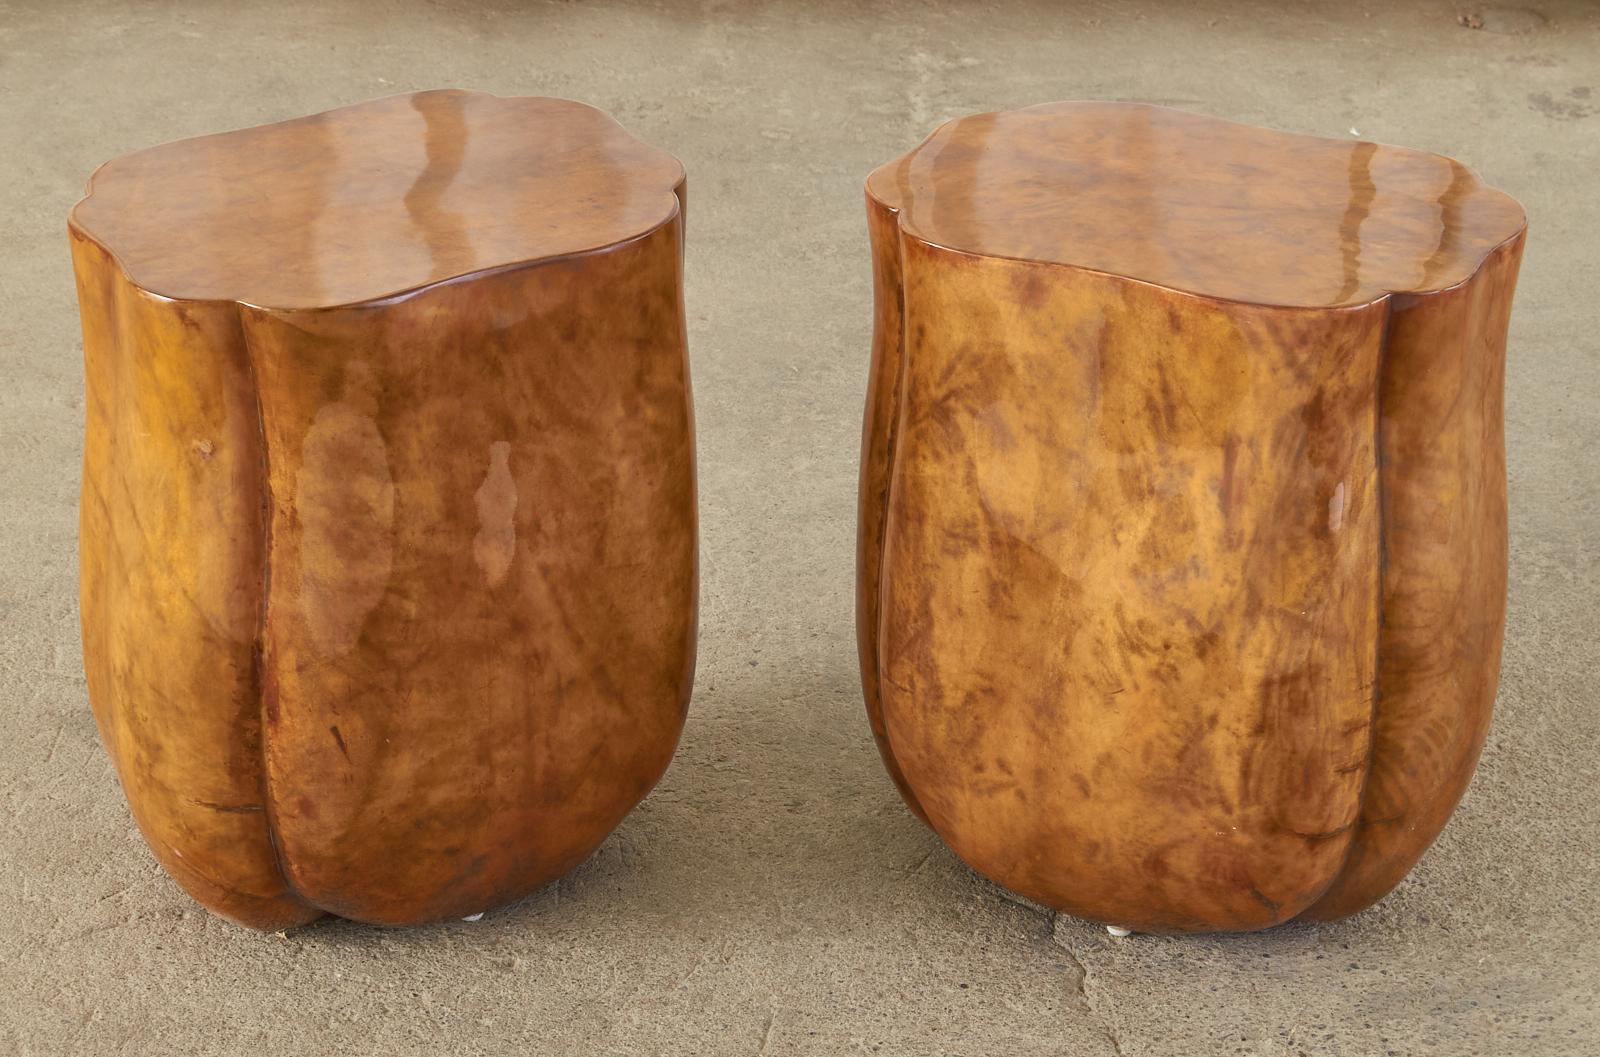 Amazing pair of wooden side or end tables having a biomorphic tulip form featuring a goatskin veneer. The subtle waisted form has ribbed sides and a flat top. The goatskin or parchment veneer has a rich patina with a Fine polished finish. Very